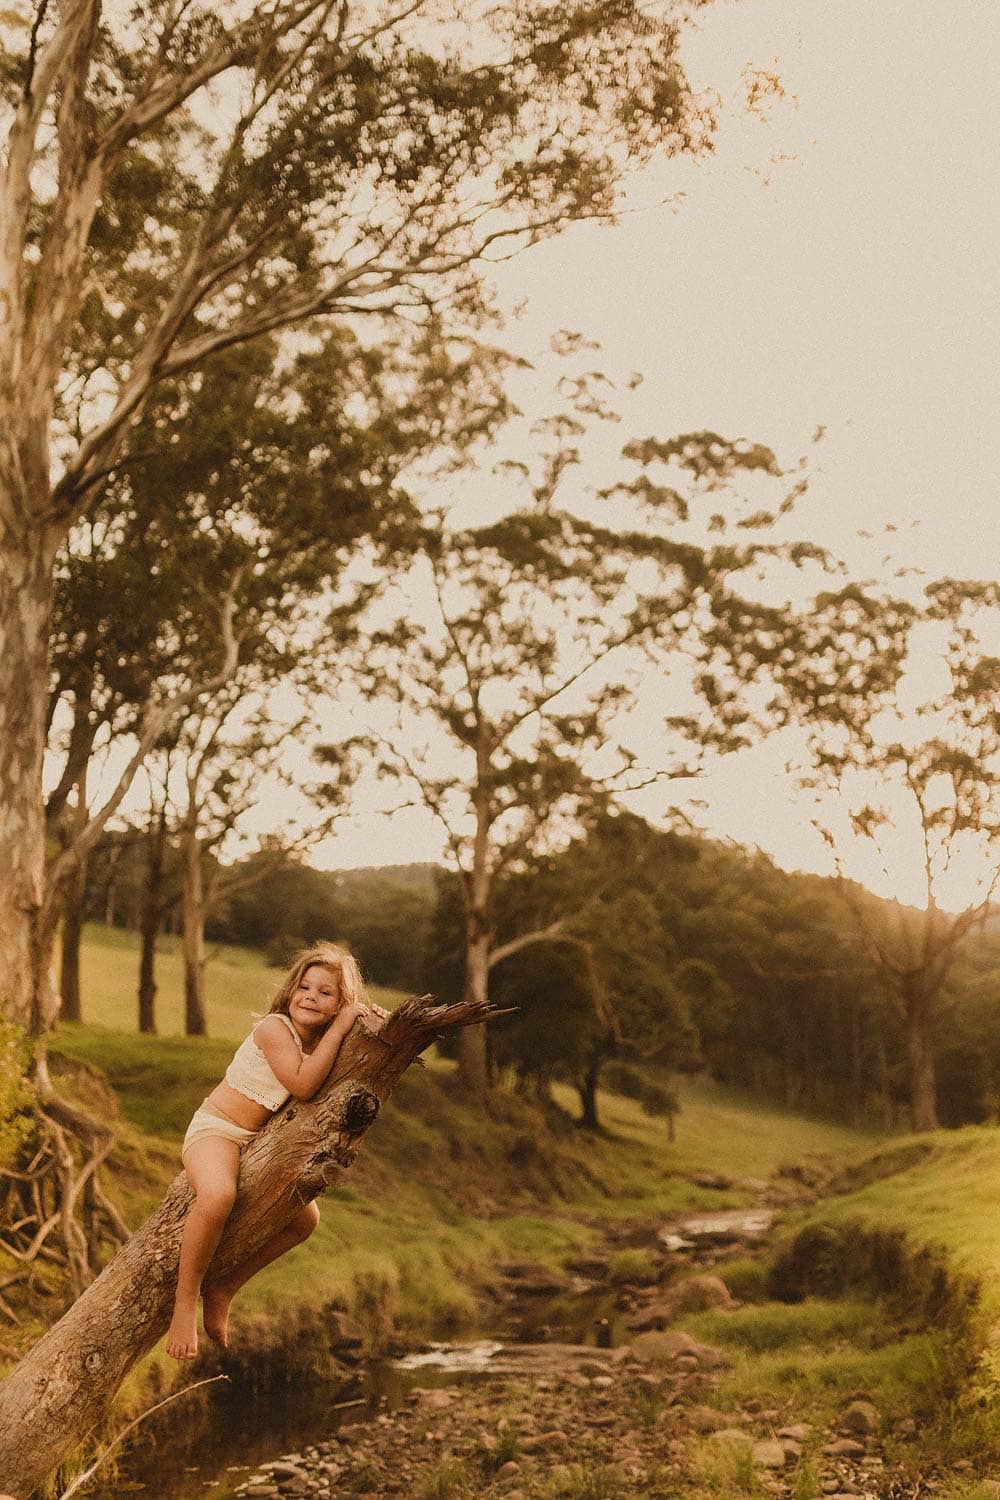 Sutherland-shire-childhood-photographer-sydney-girl-laying-on-tree-with-meadow-in-background